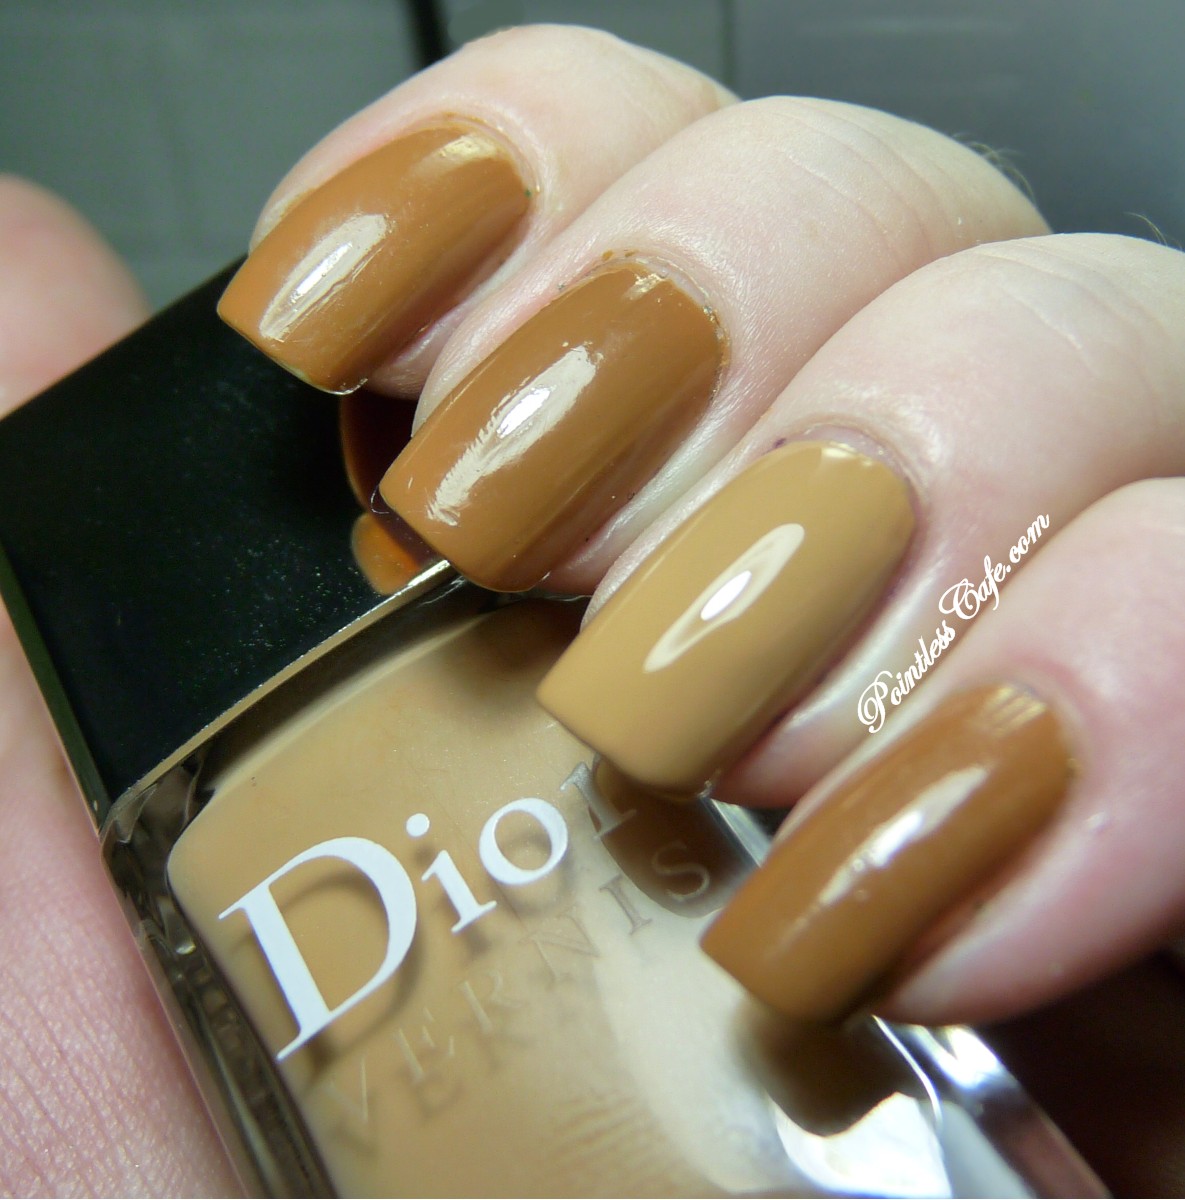 Nails Inc. Oakley Street vs Dior Camel (on accent nail)